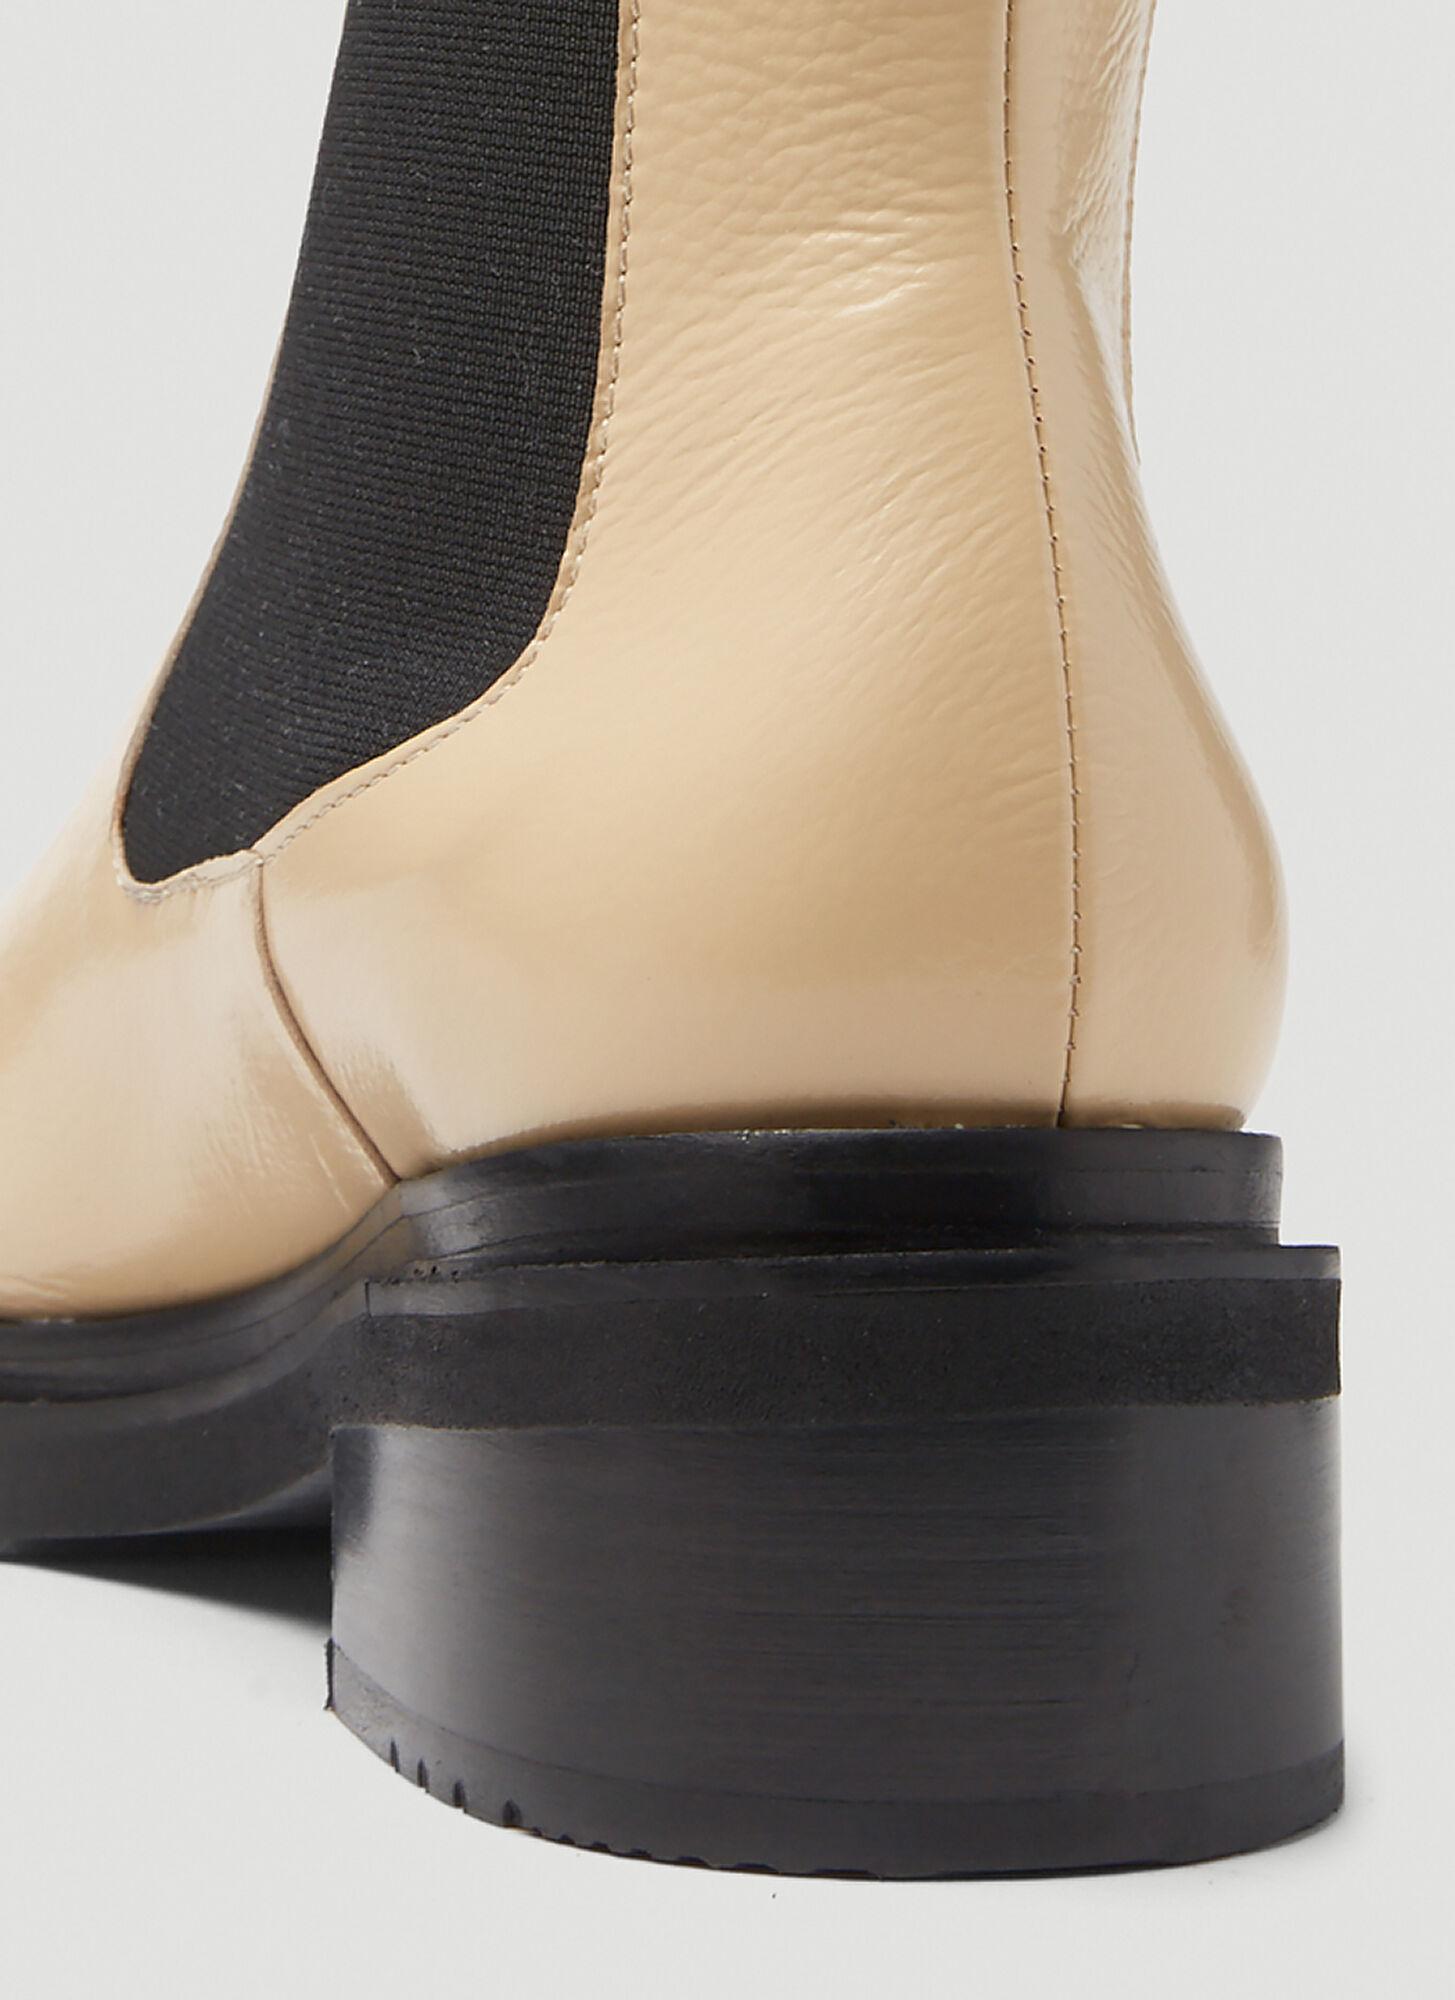 BY FAR Leather Rika Chelsea Boots in Beige (Natural) - Save 52% | Lyst